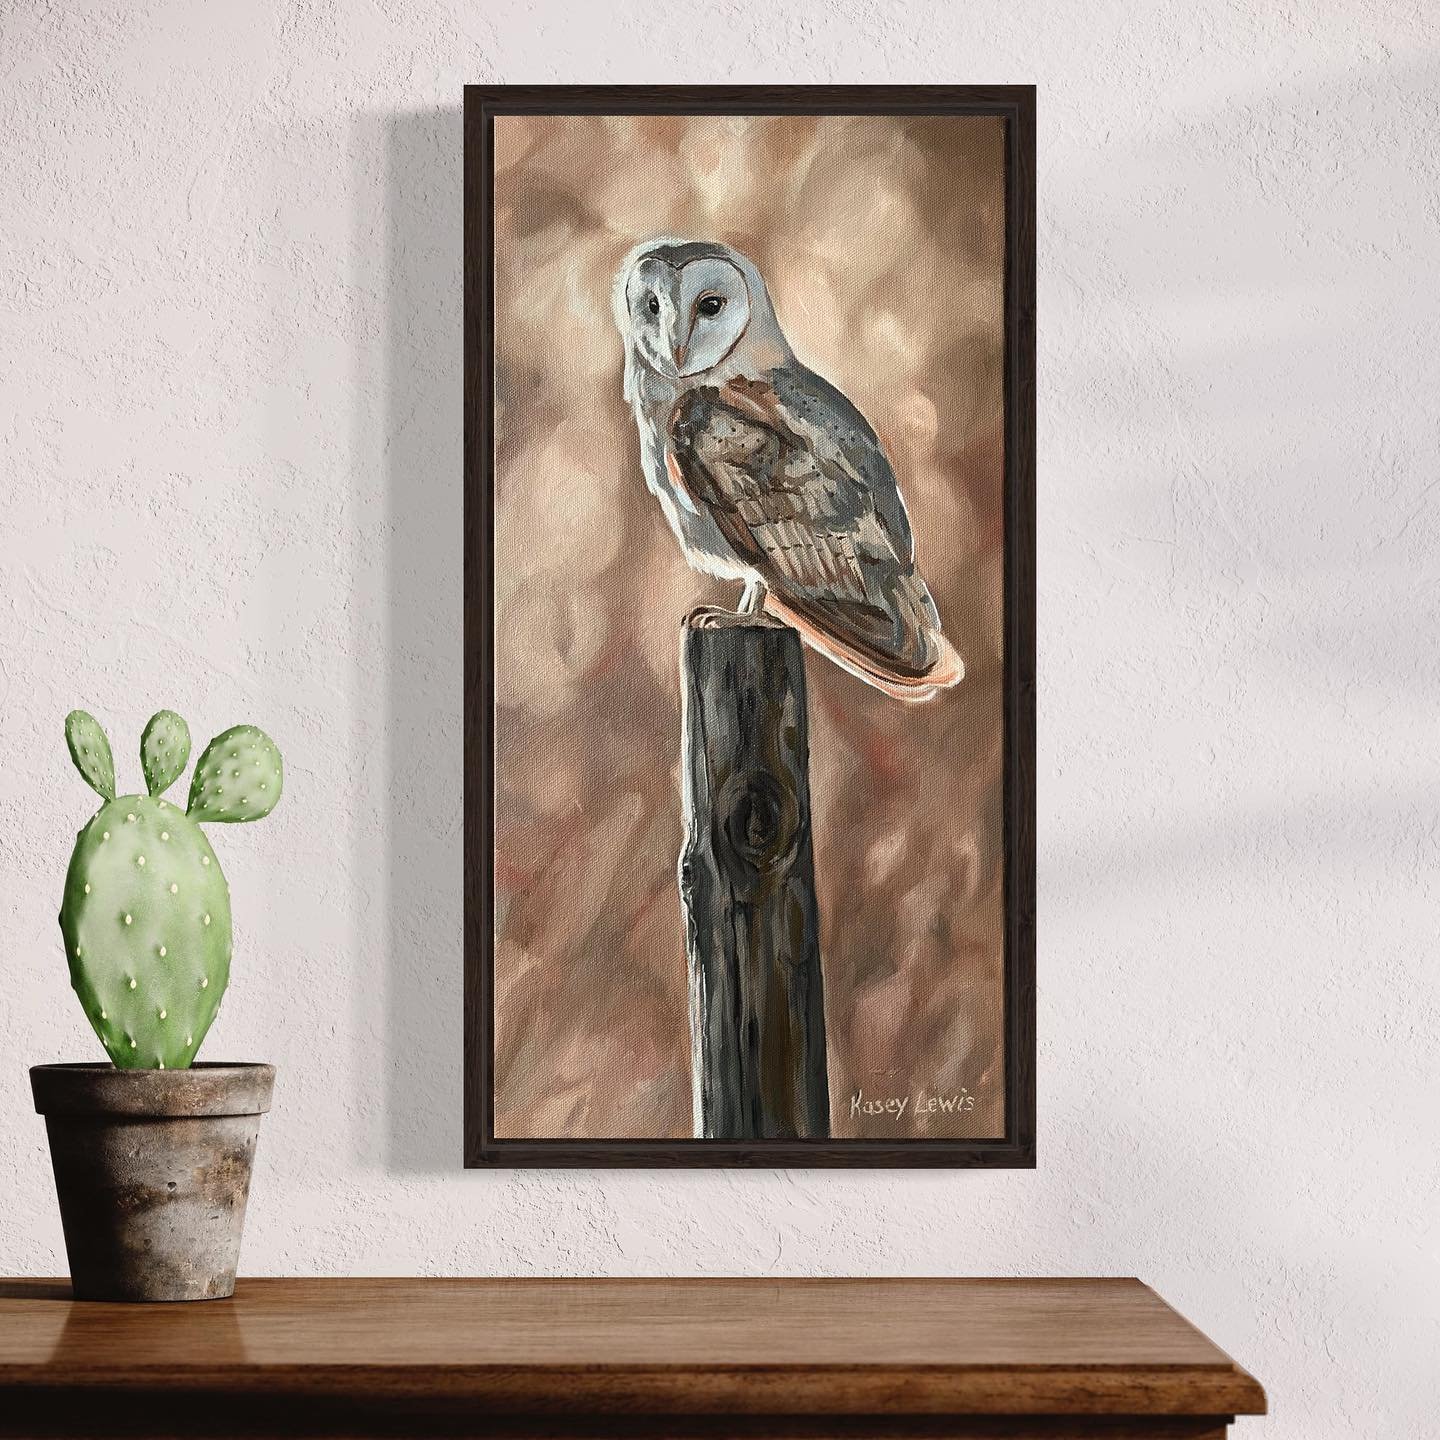 New painting&hellip; fresh off the easel.
Barn owl. Definitely my favorite owl to paint!
Oil on canvas 10x20in.
#barnowlsofinstagram #barnowlpainting #oilpainting #nature #wildlifeart #natureart #moody #dusk #glowing #owlpainting